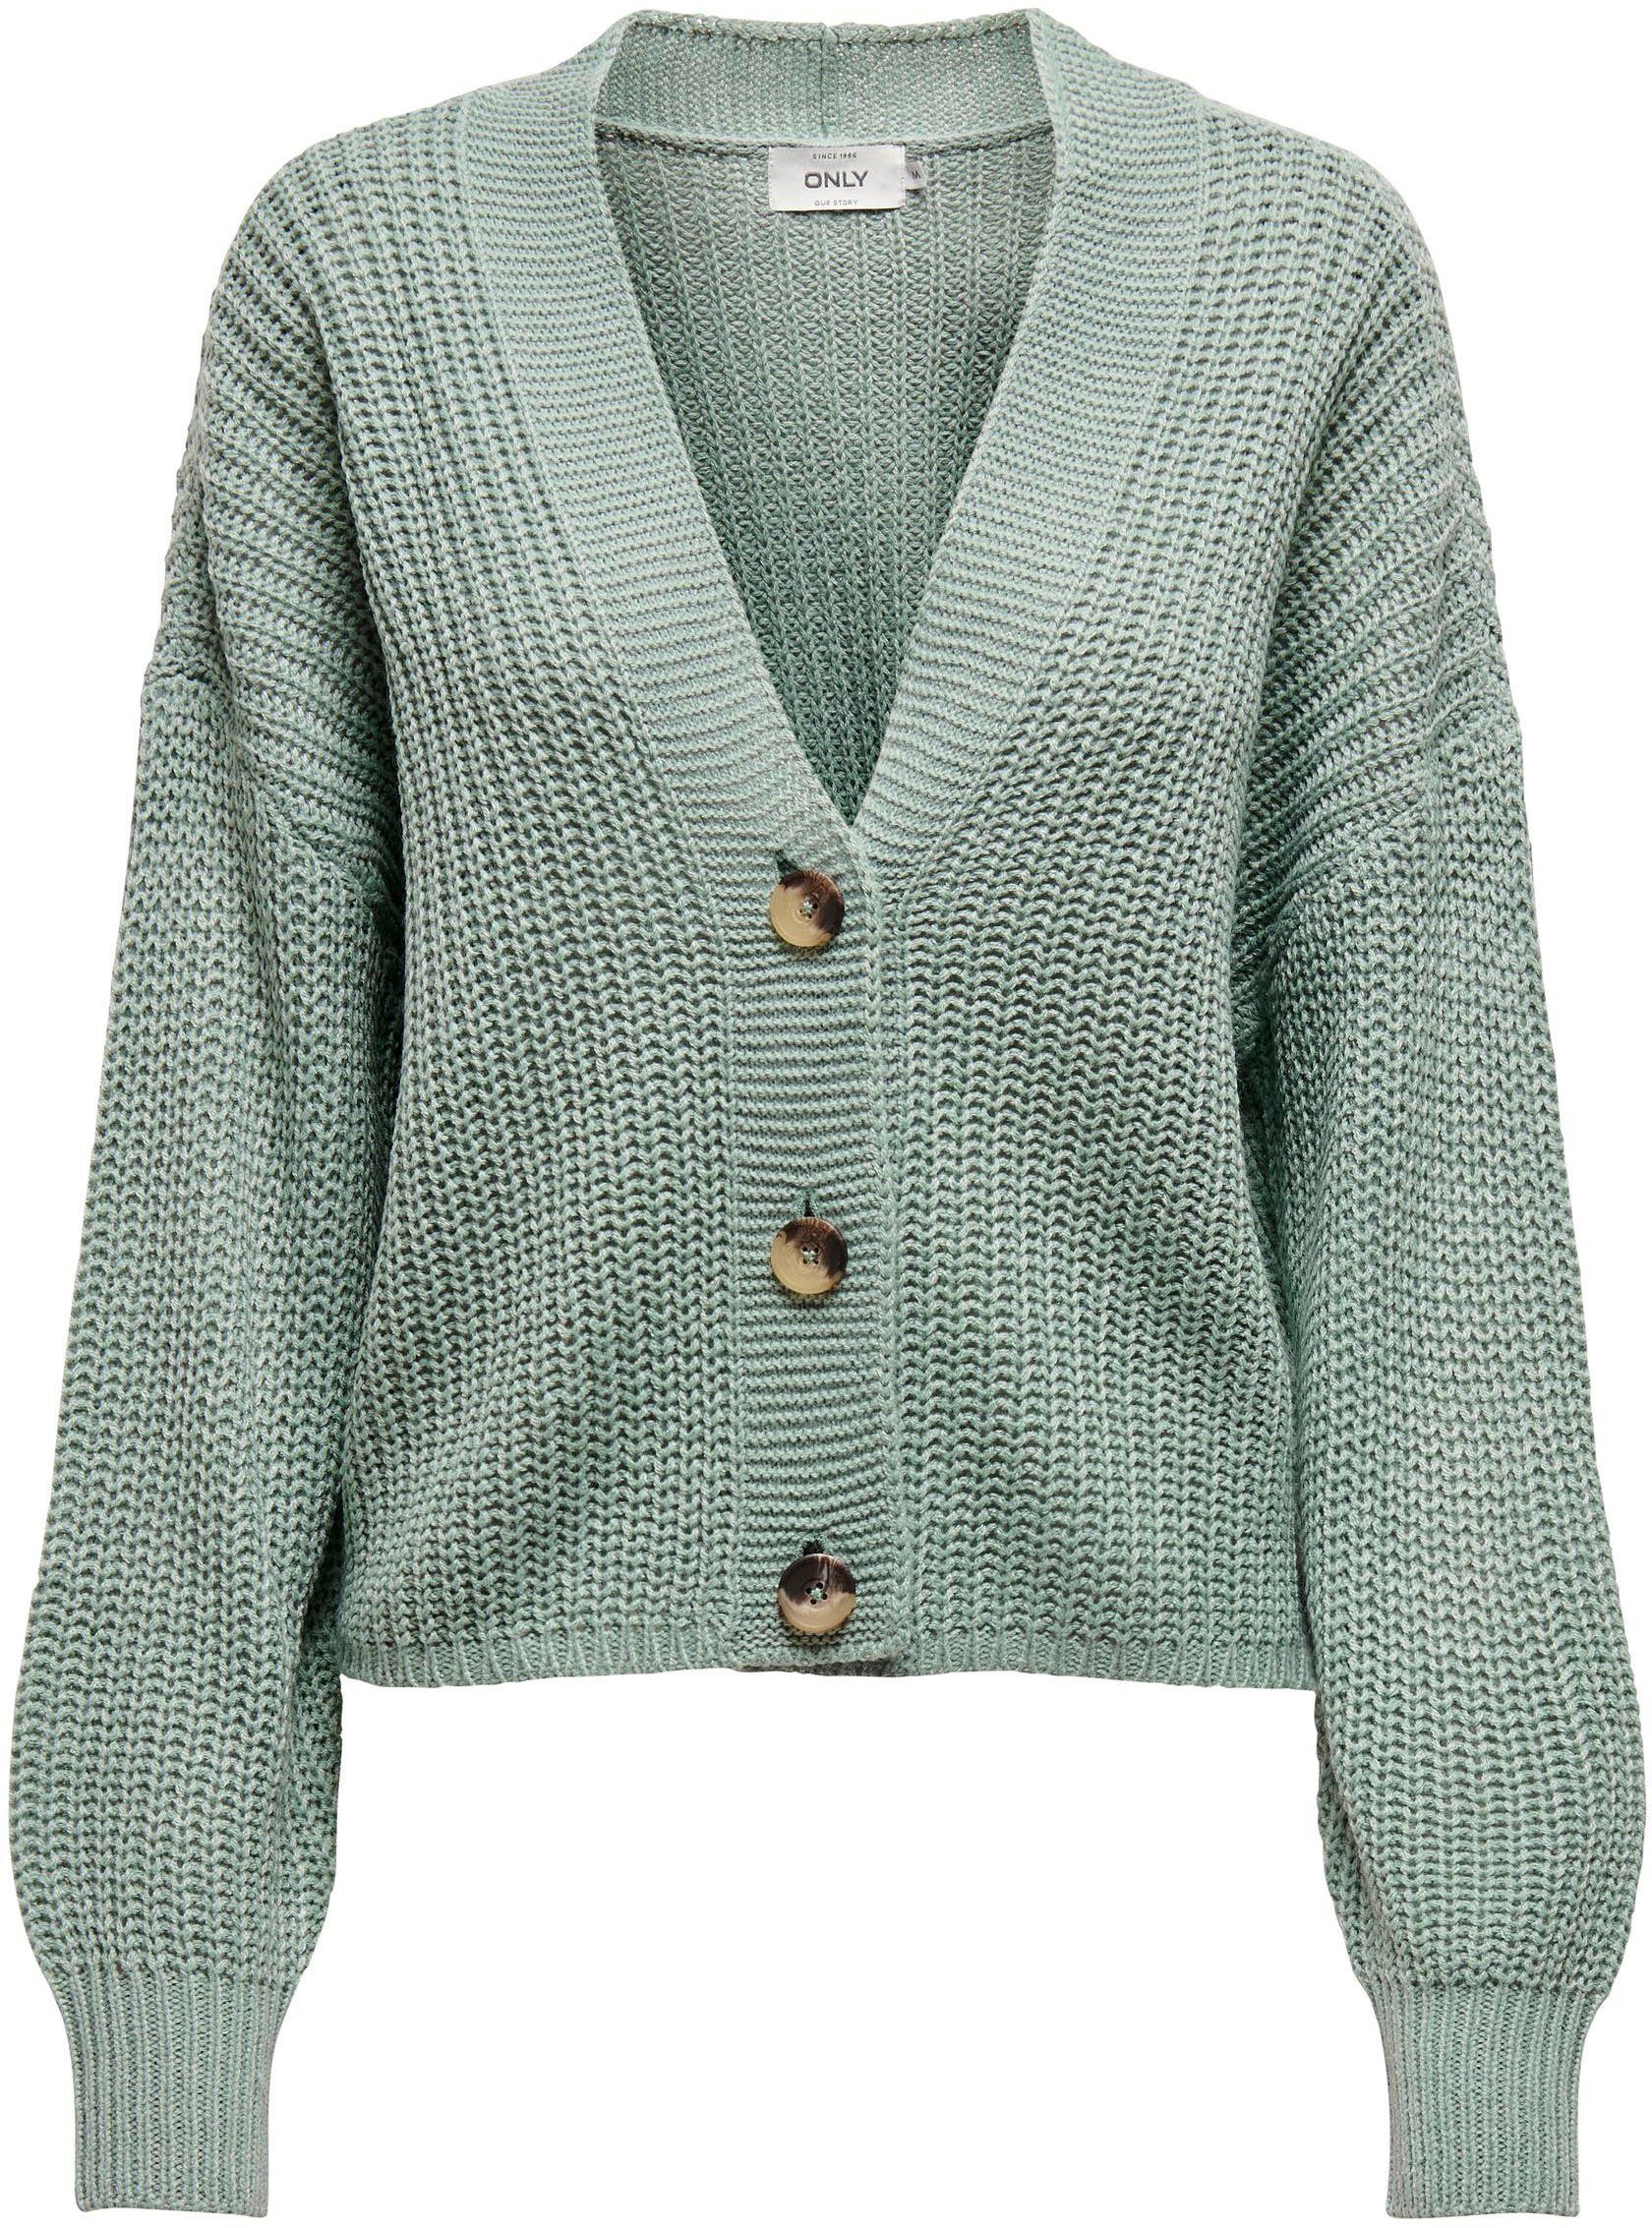 L/S chinois ONLCAROL CARDIGAN green Strickjacke ONLY NOOS NICE KNT